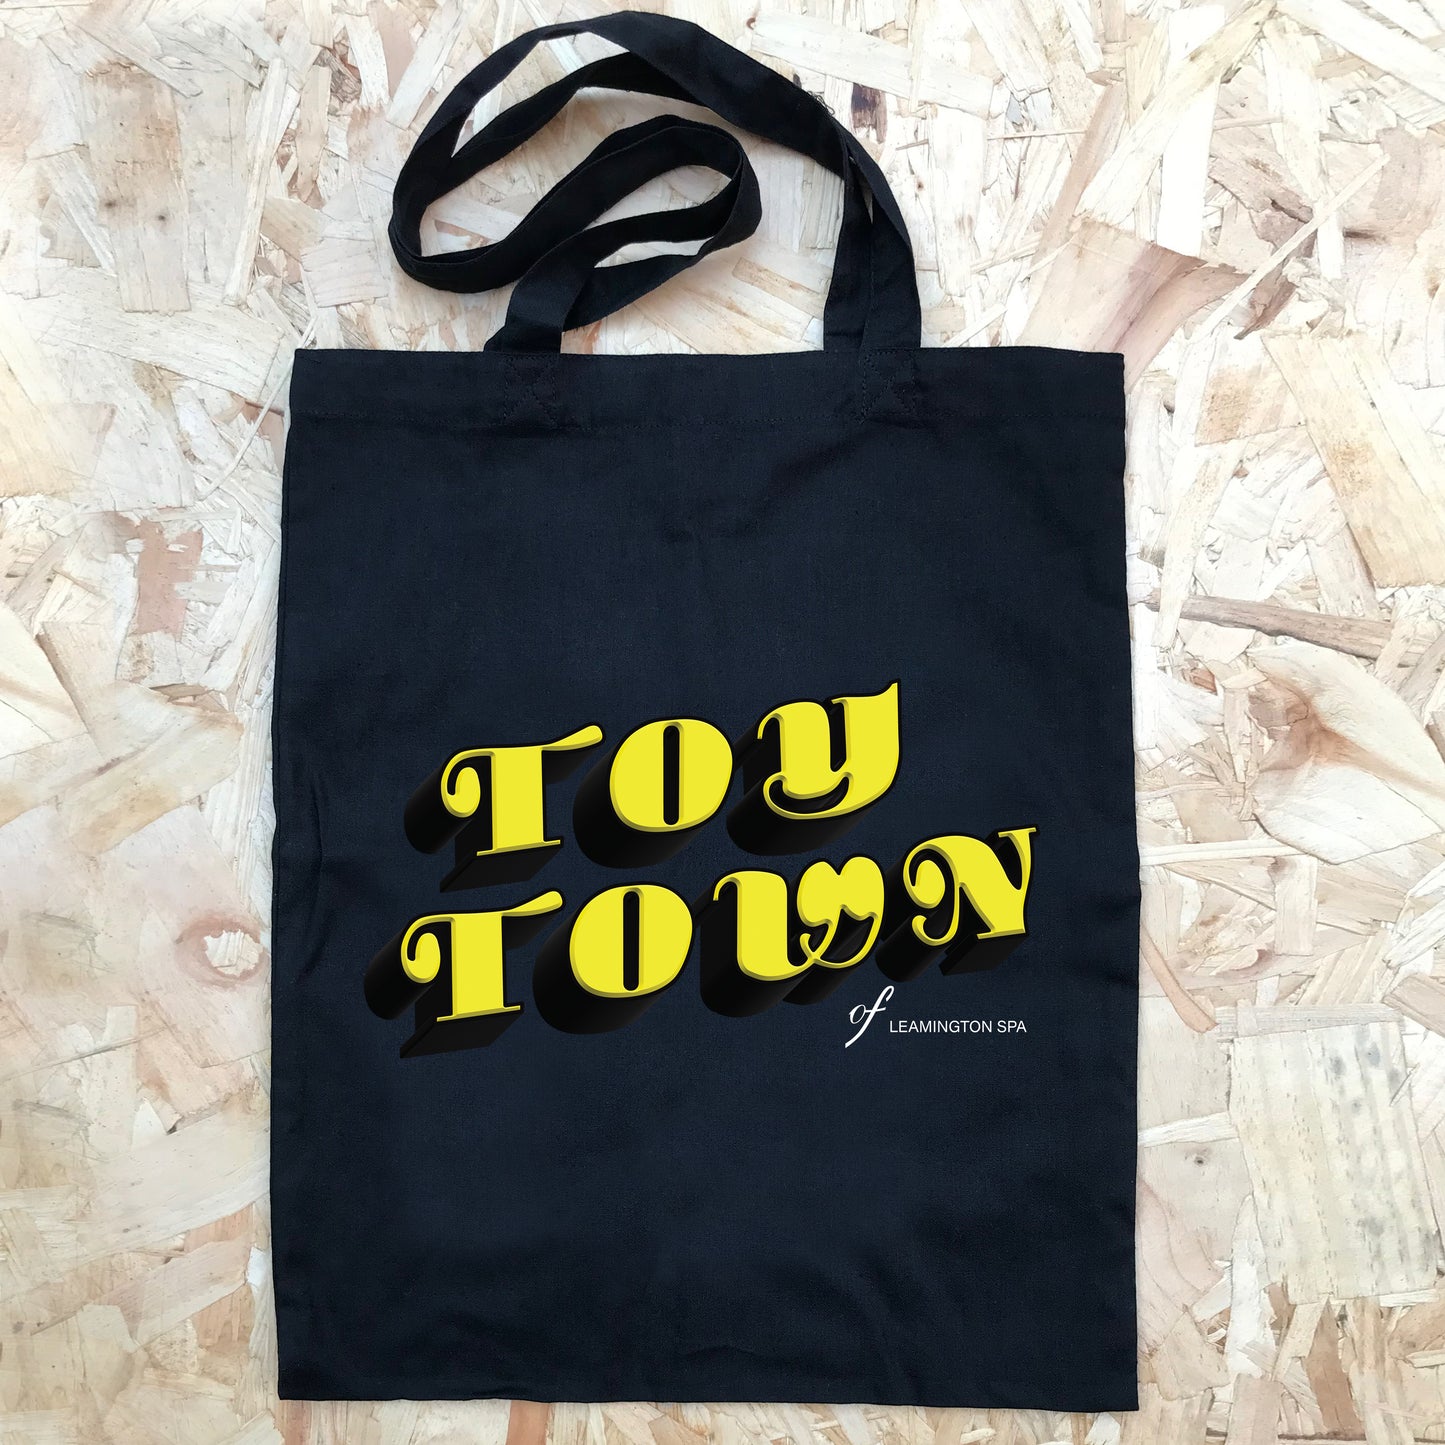 Toy Town 2 Tote Bag